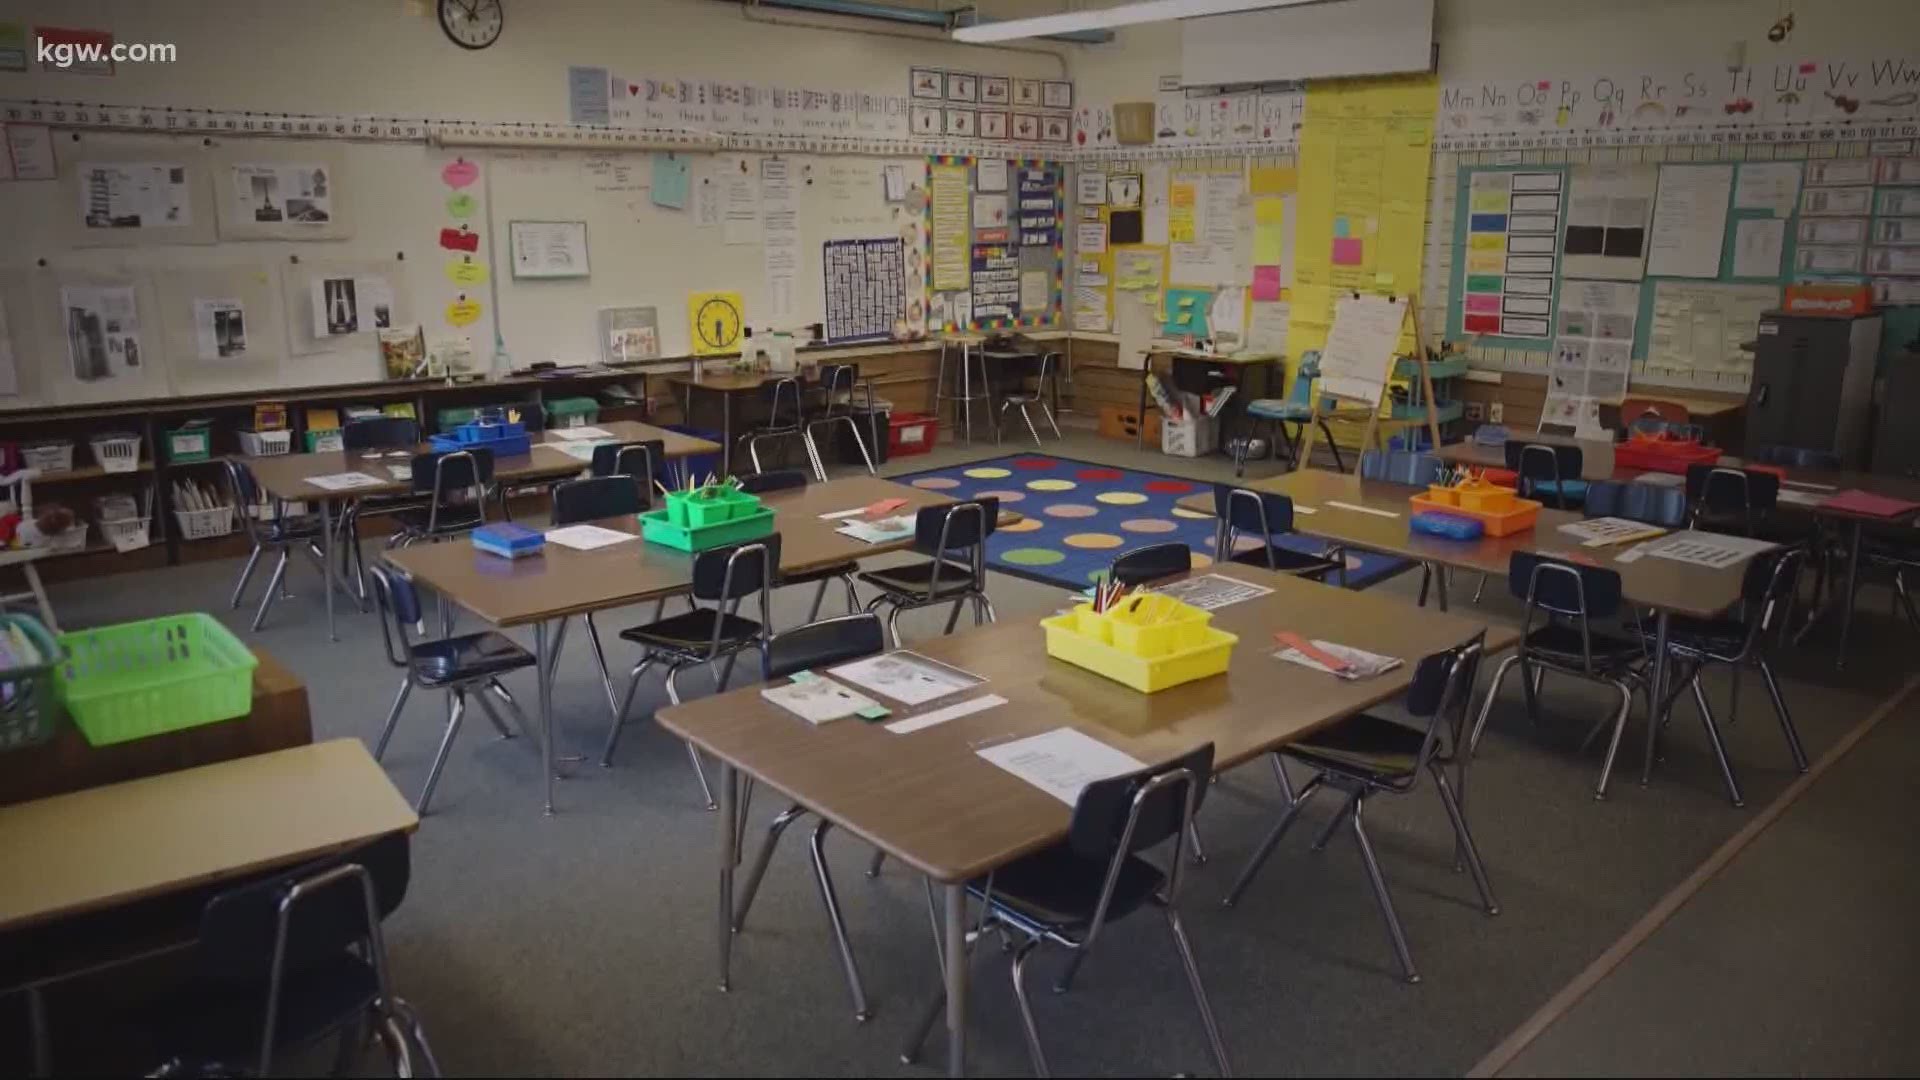 A Facebook group of more than 9,000 educators and parents want 14 days of no new COVID-19 cases before Oregon opens schools.